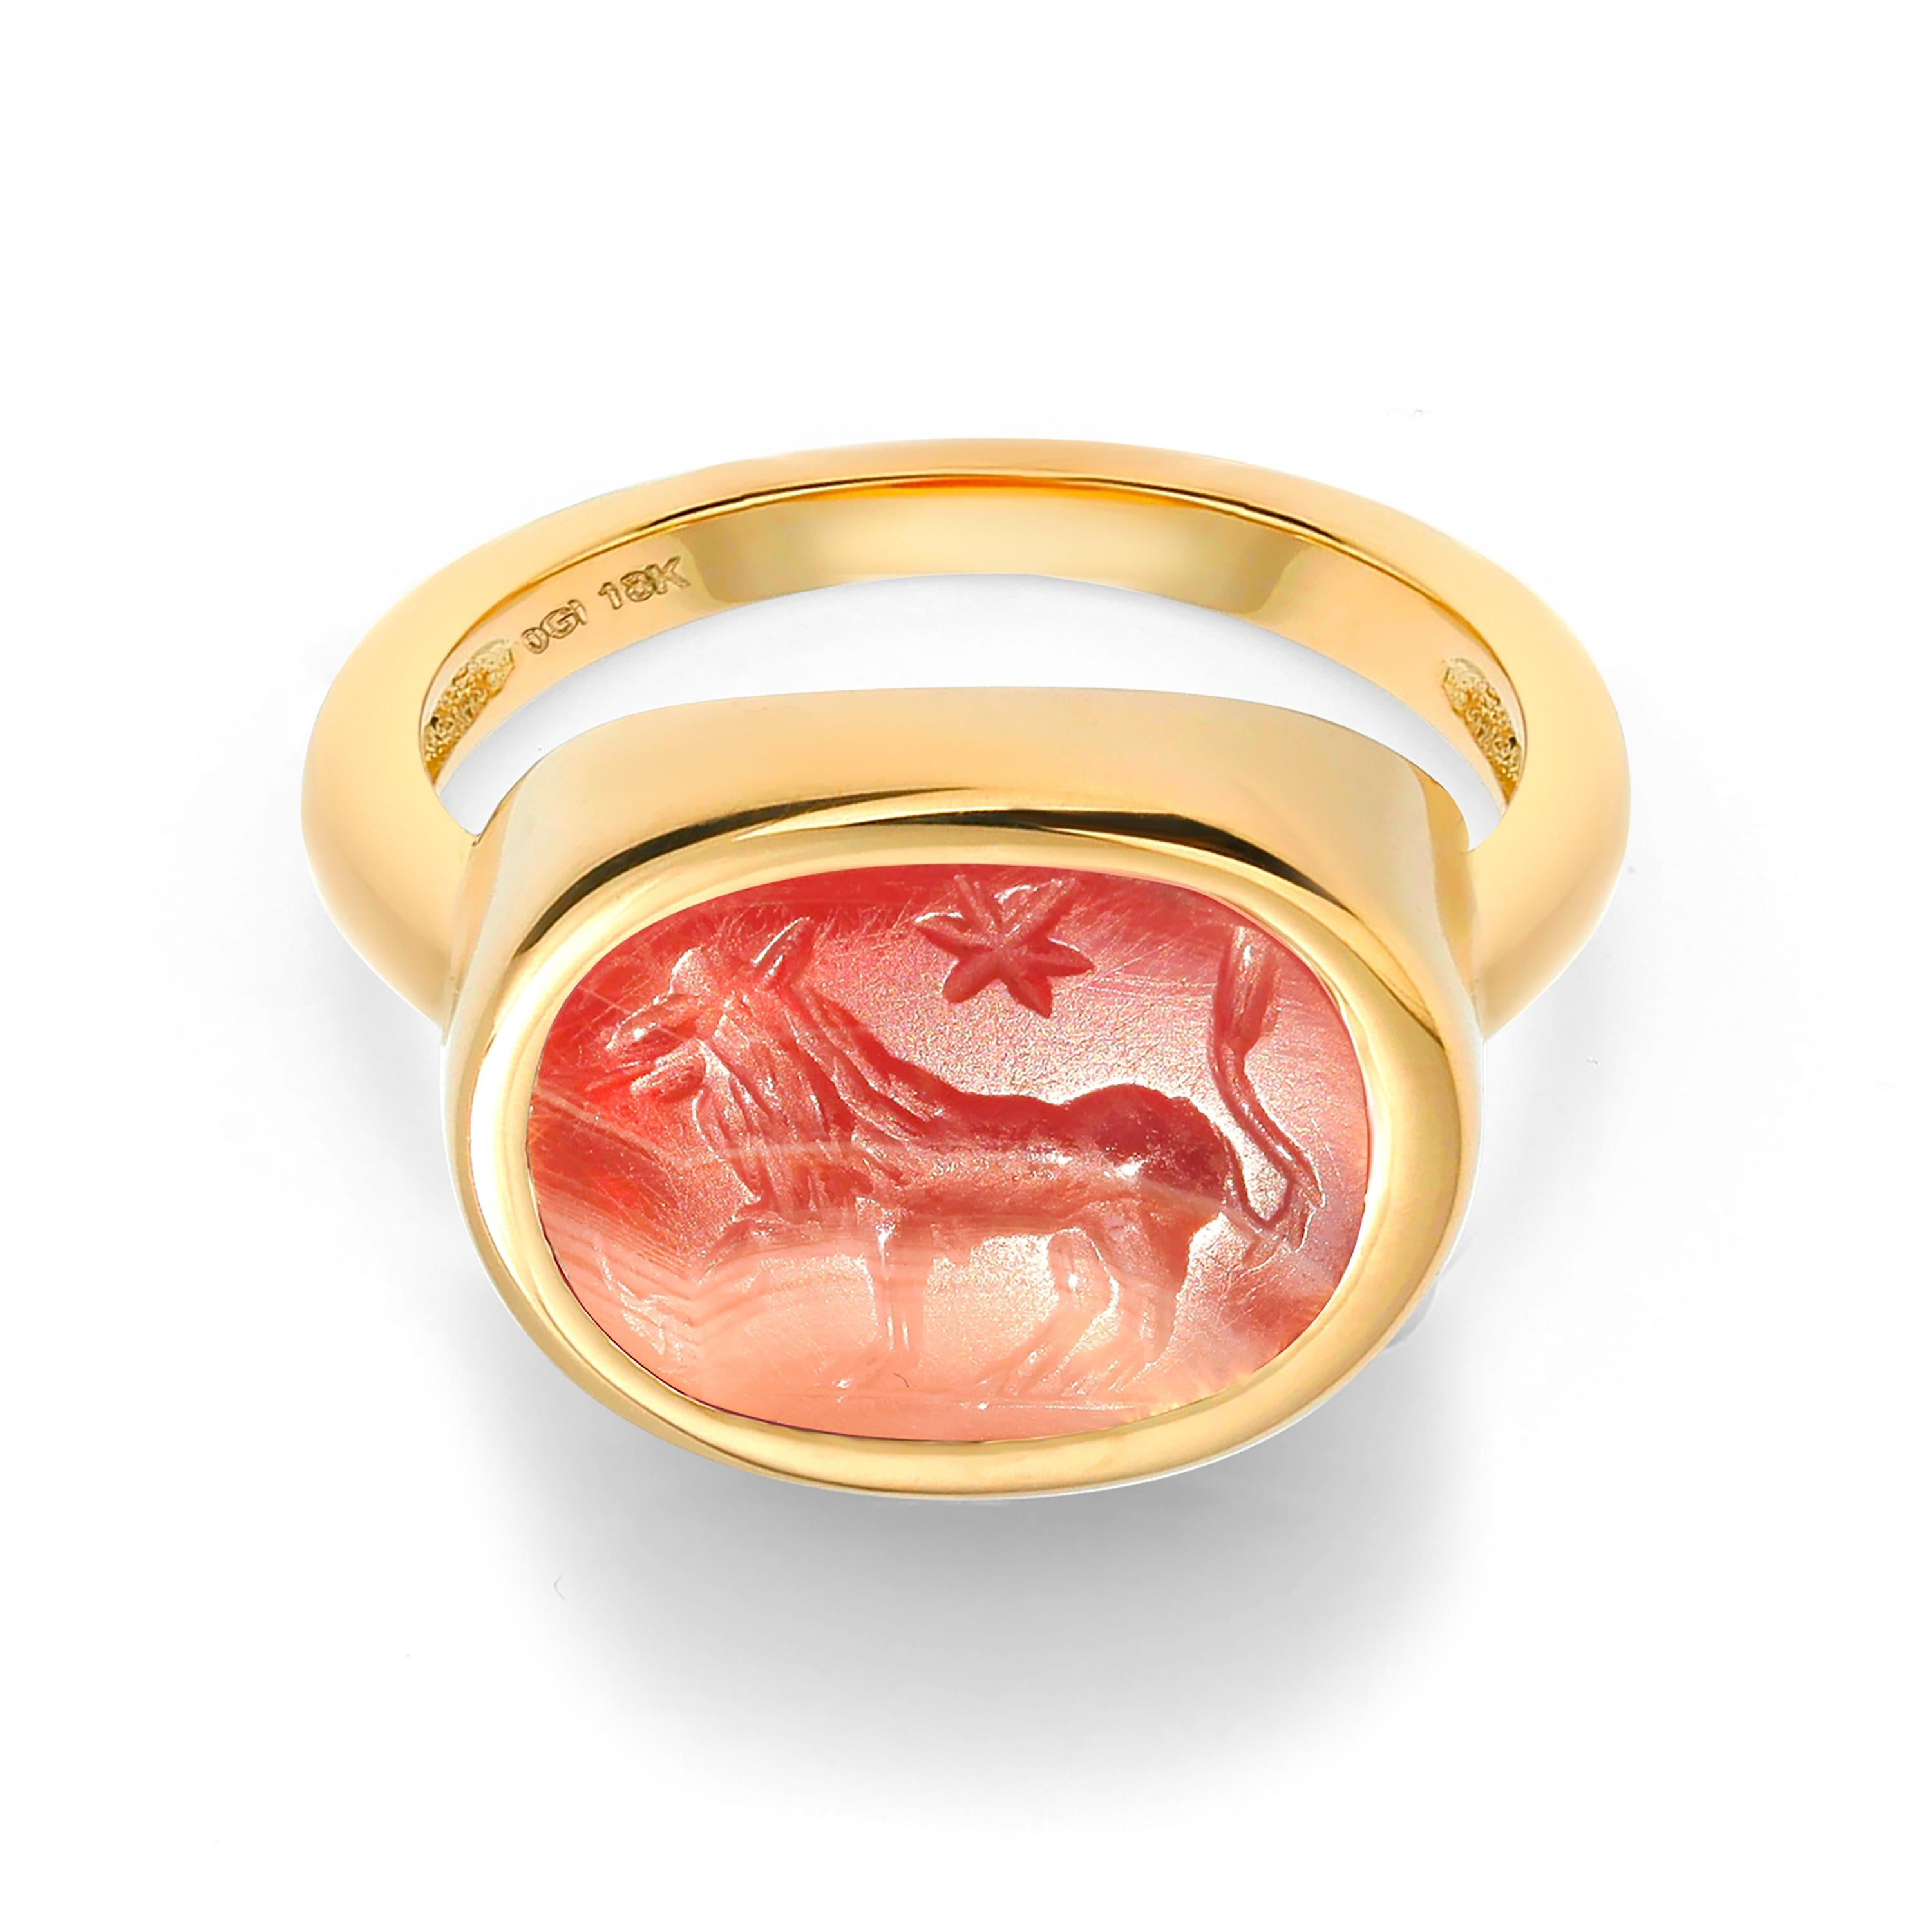 Eighteen Karat Gold Ring with Antique Agate Intaglio from Roman Period 2